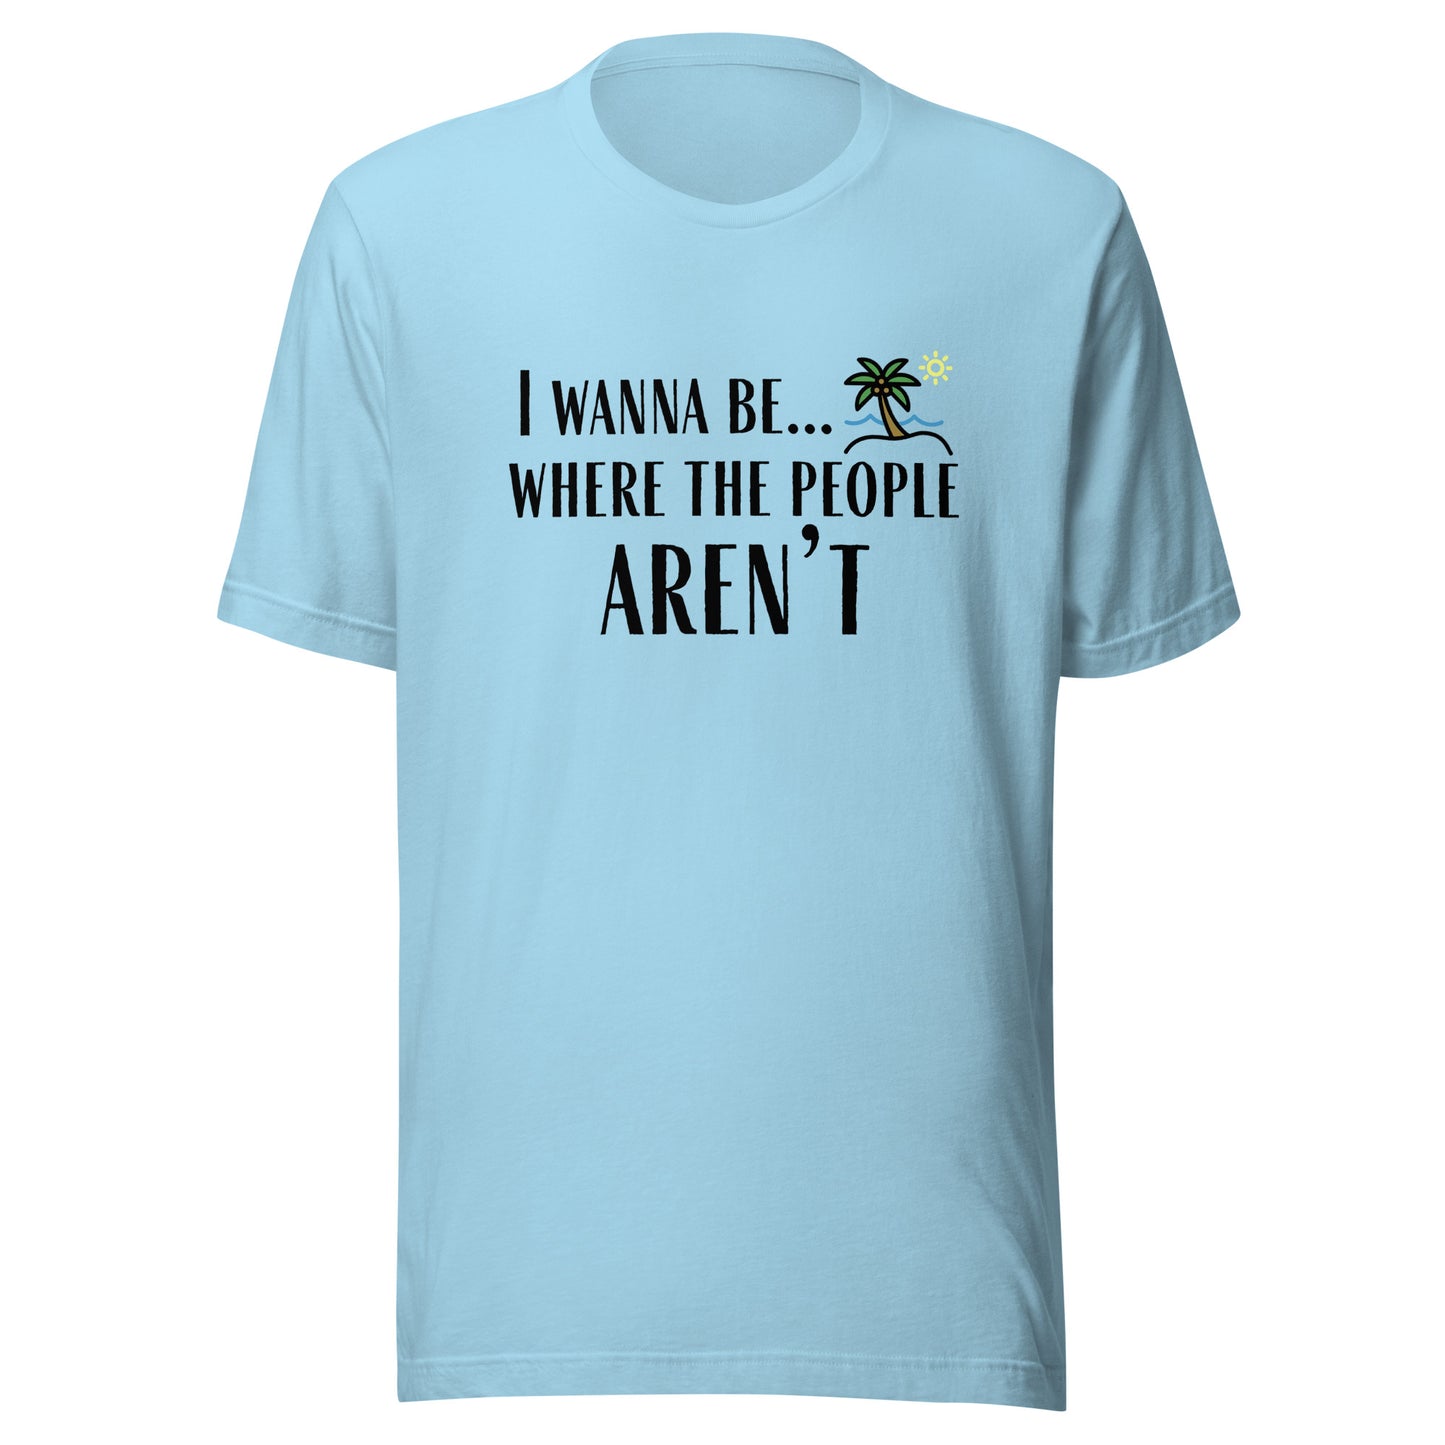 I Wanna Be... Where the People Aren't T-Shirt